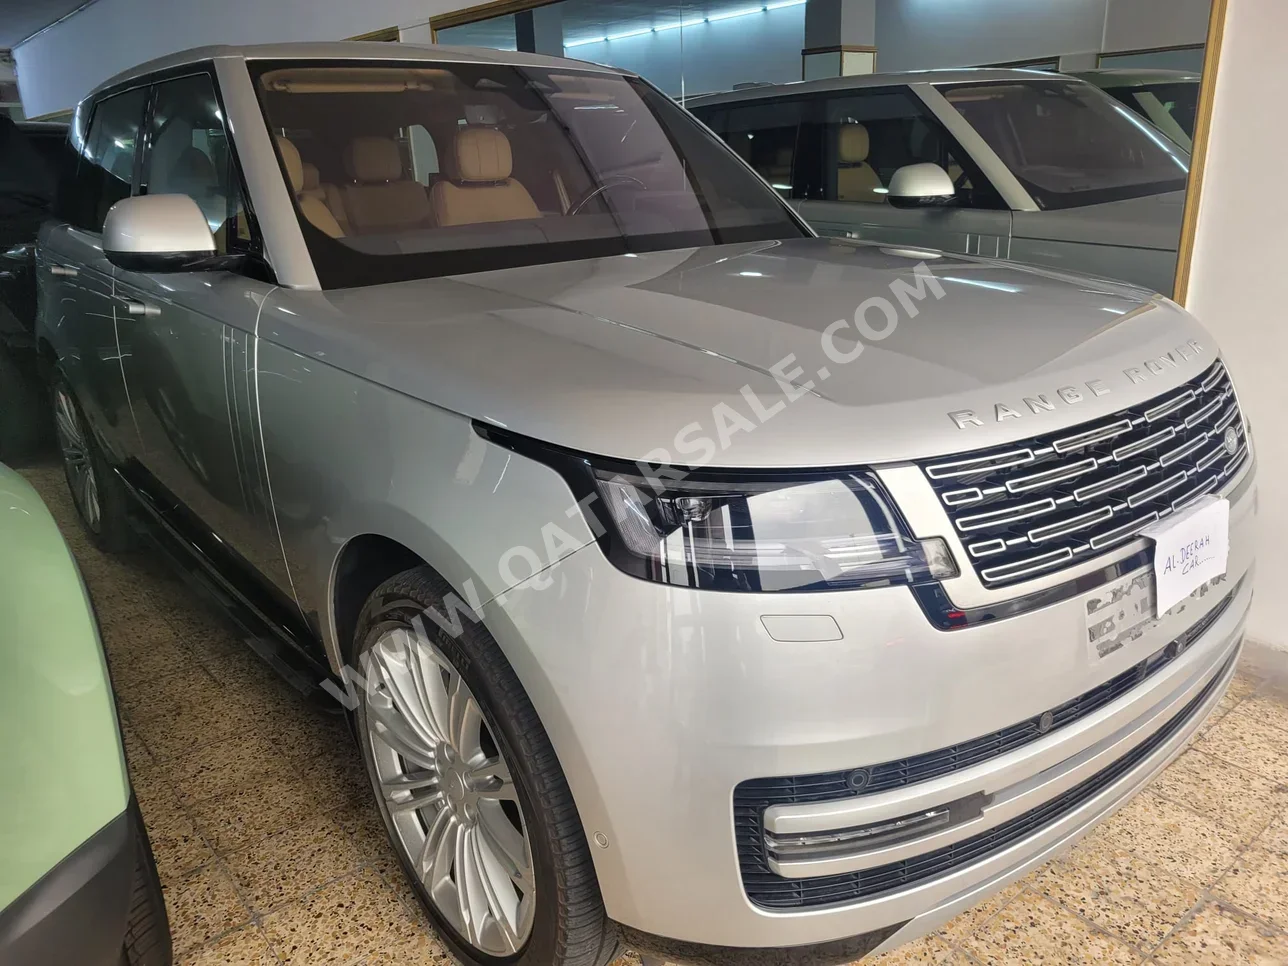 Land Rover  Range Rover  Vogue HSE  2023  Automatic  22,000 Km  8 Cylinder  Four Wheel Drive (4WD)  SUV  Gold  With Warranty